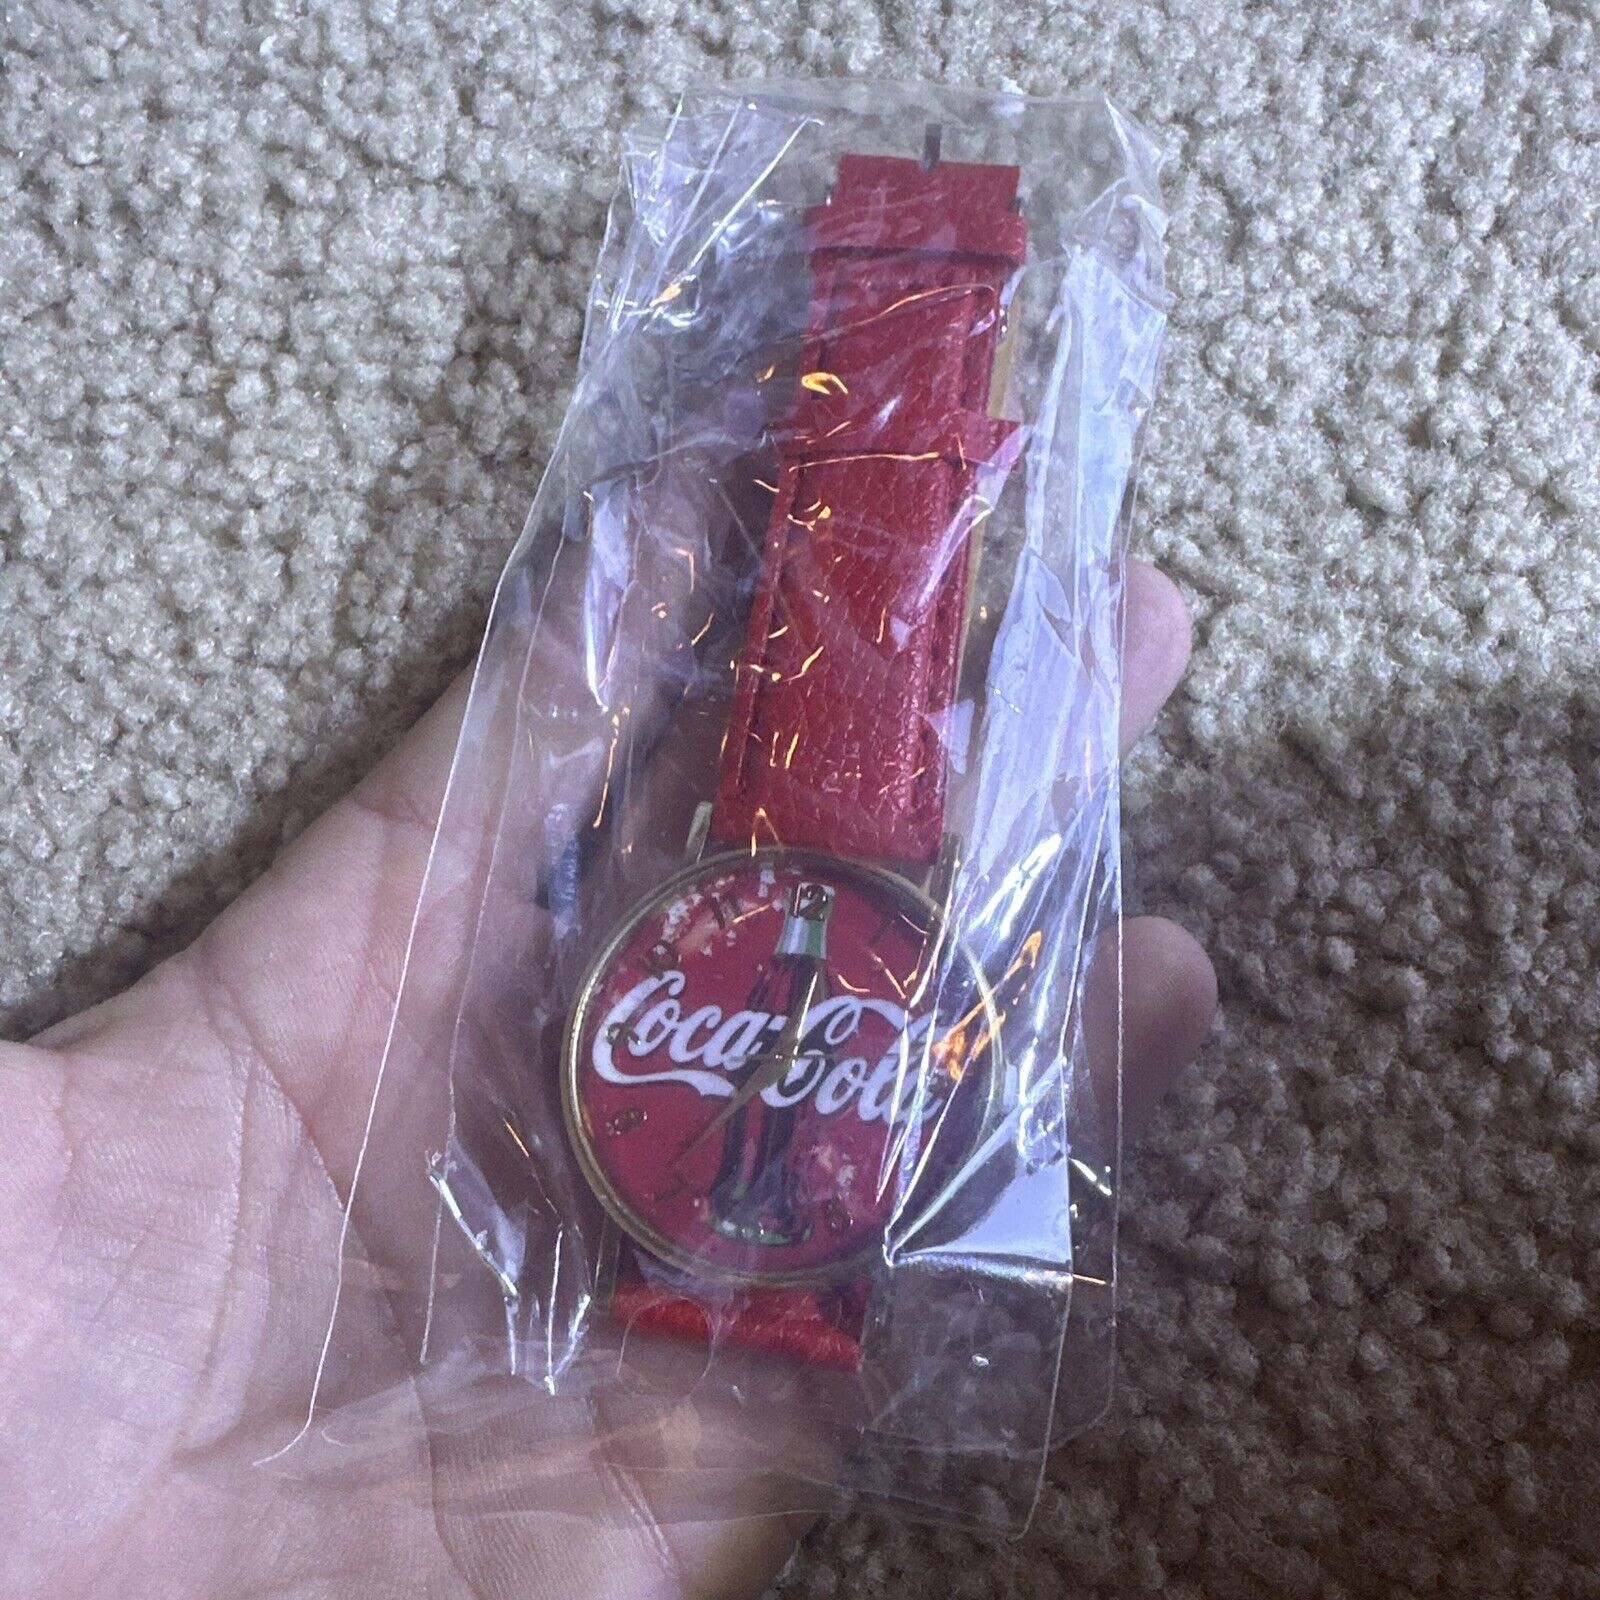 Wrist Watch Coca-Cola New In Wrapper Red, Gold Color.